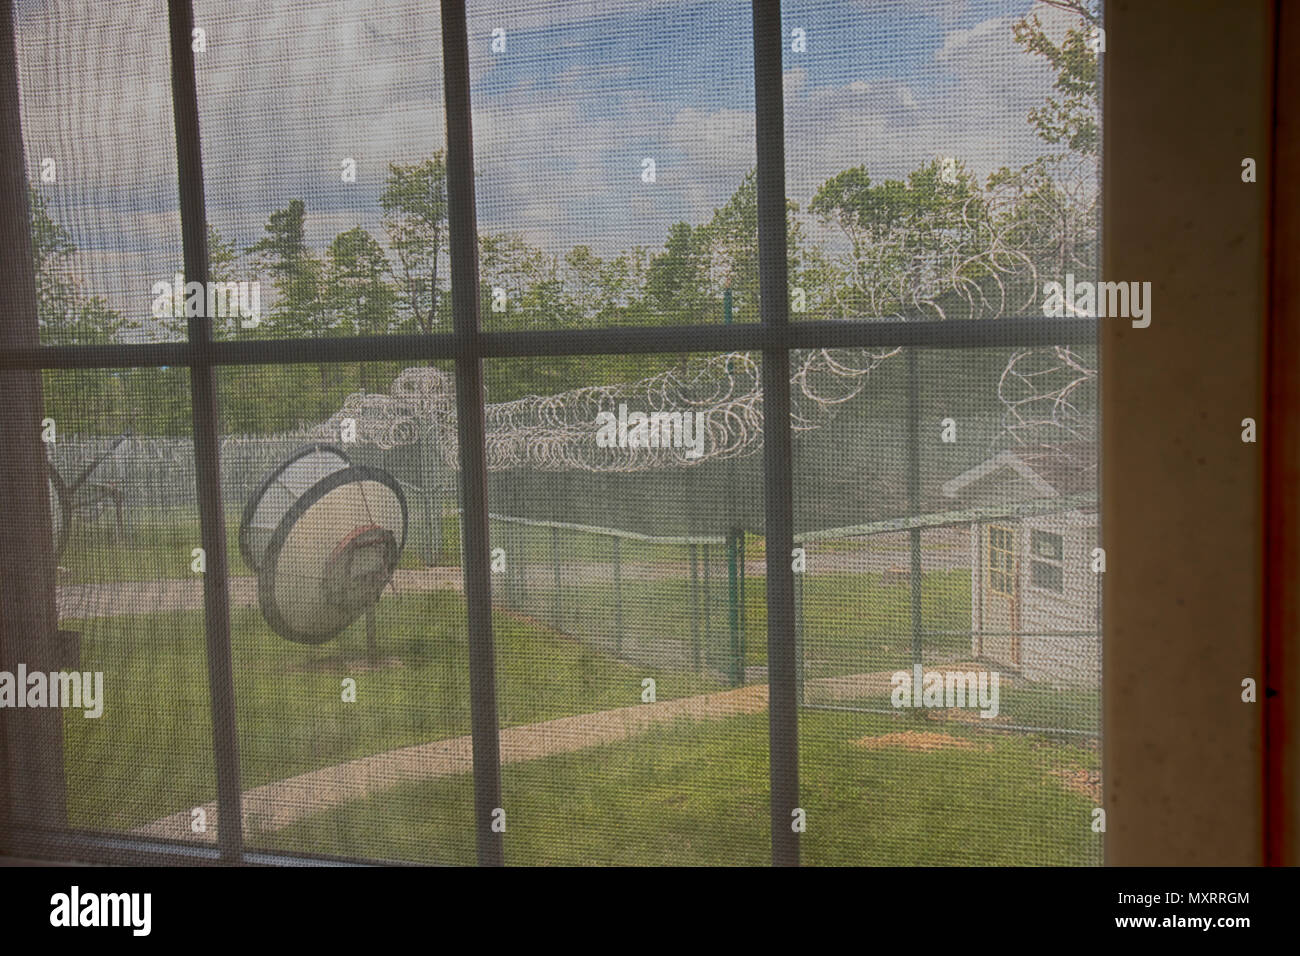 View through bars on window from inside abandoned prison thourgh mesh and bars looking at yard with guard house, metal fencing with razor wire and sat Stock Photo